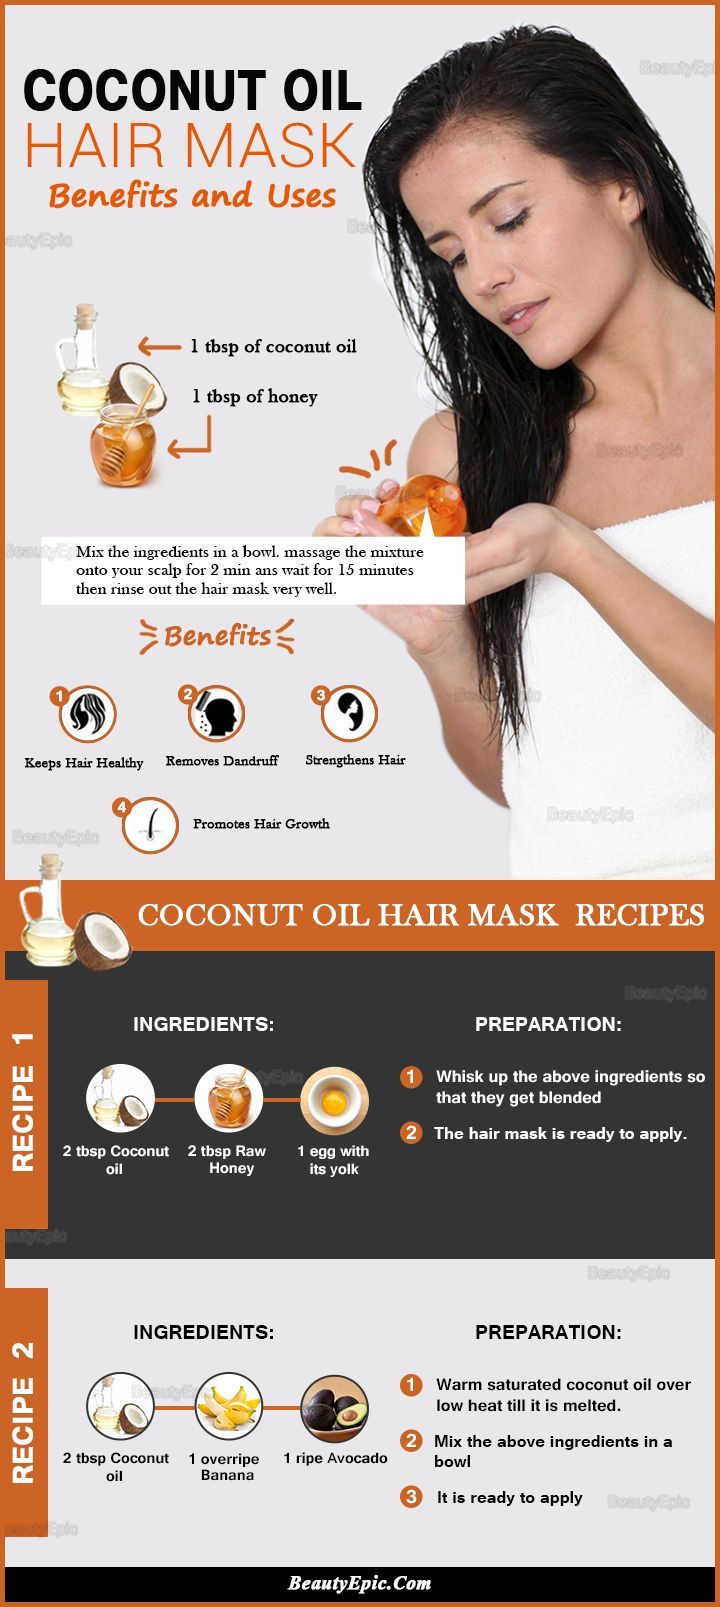 How to Do Coconut Oil Hair Mask? Benefits, Uses & Hair Masks -   16 makeup Noche coconut oil ideas